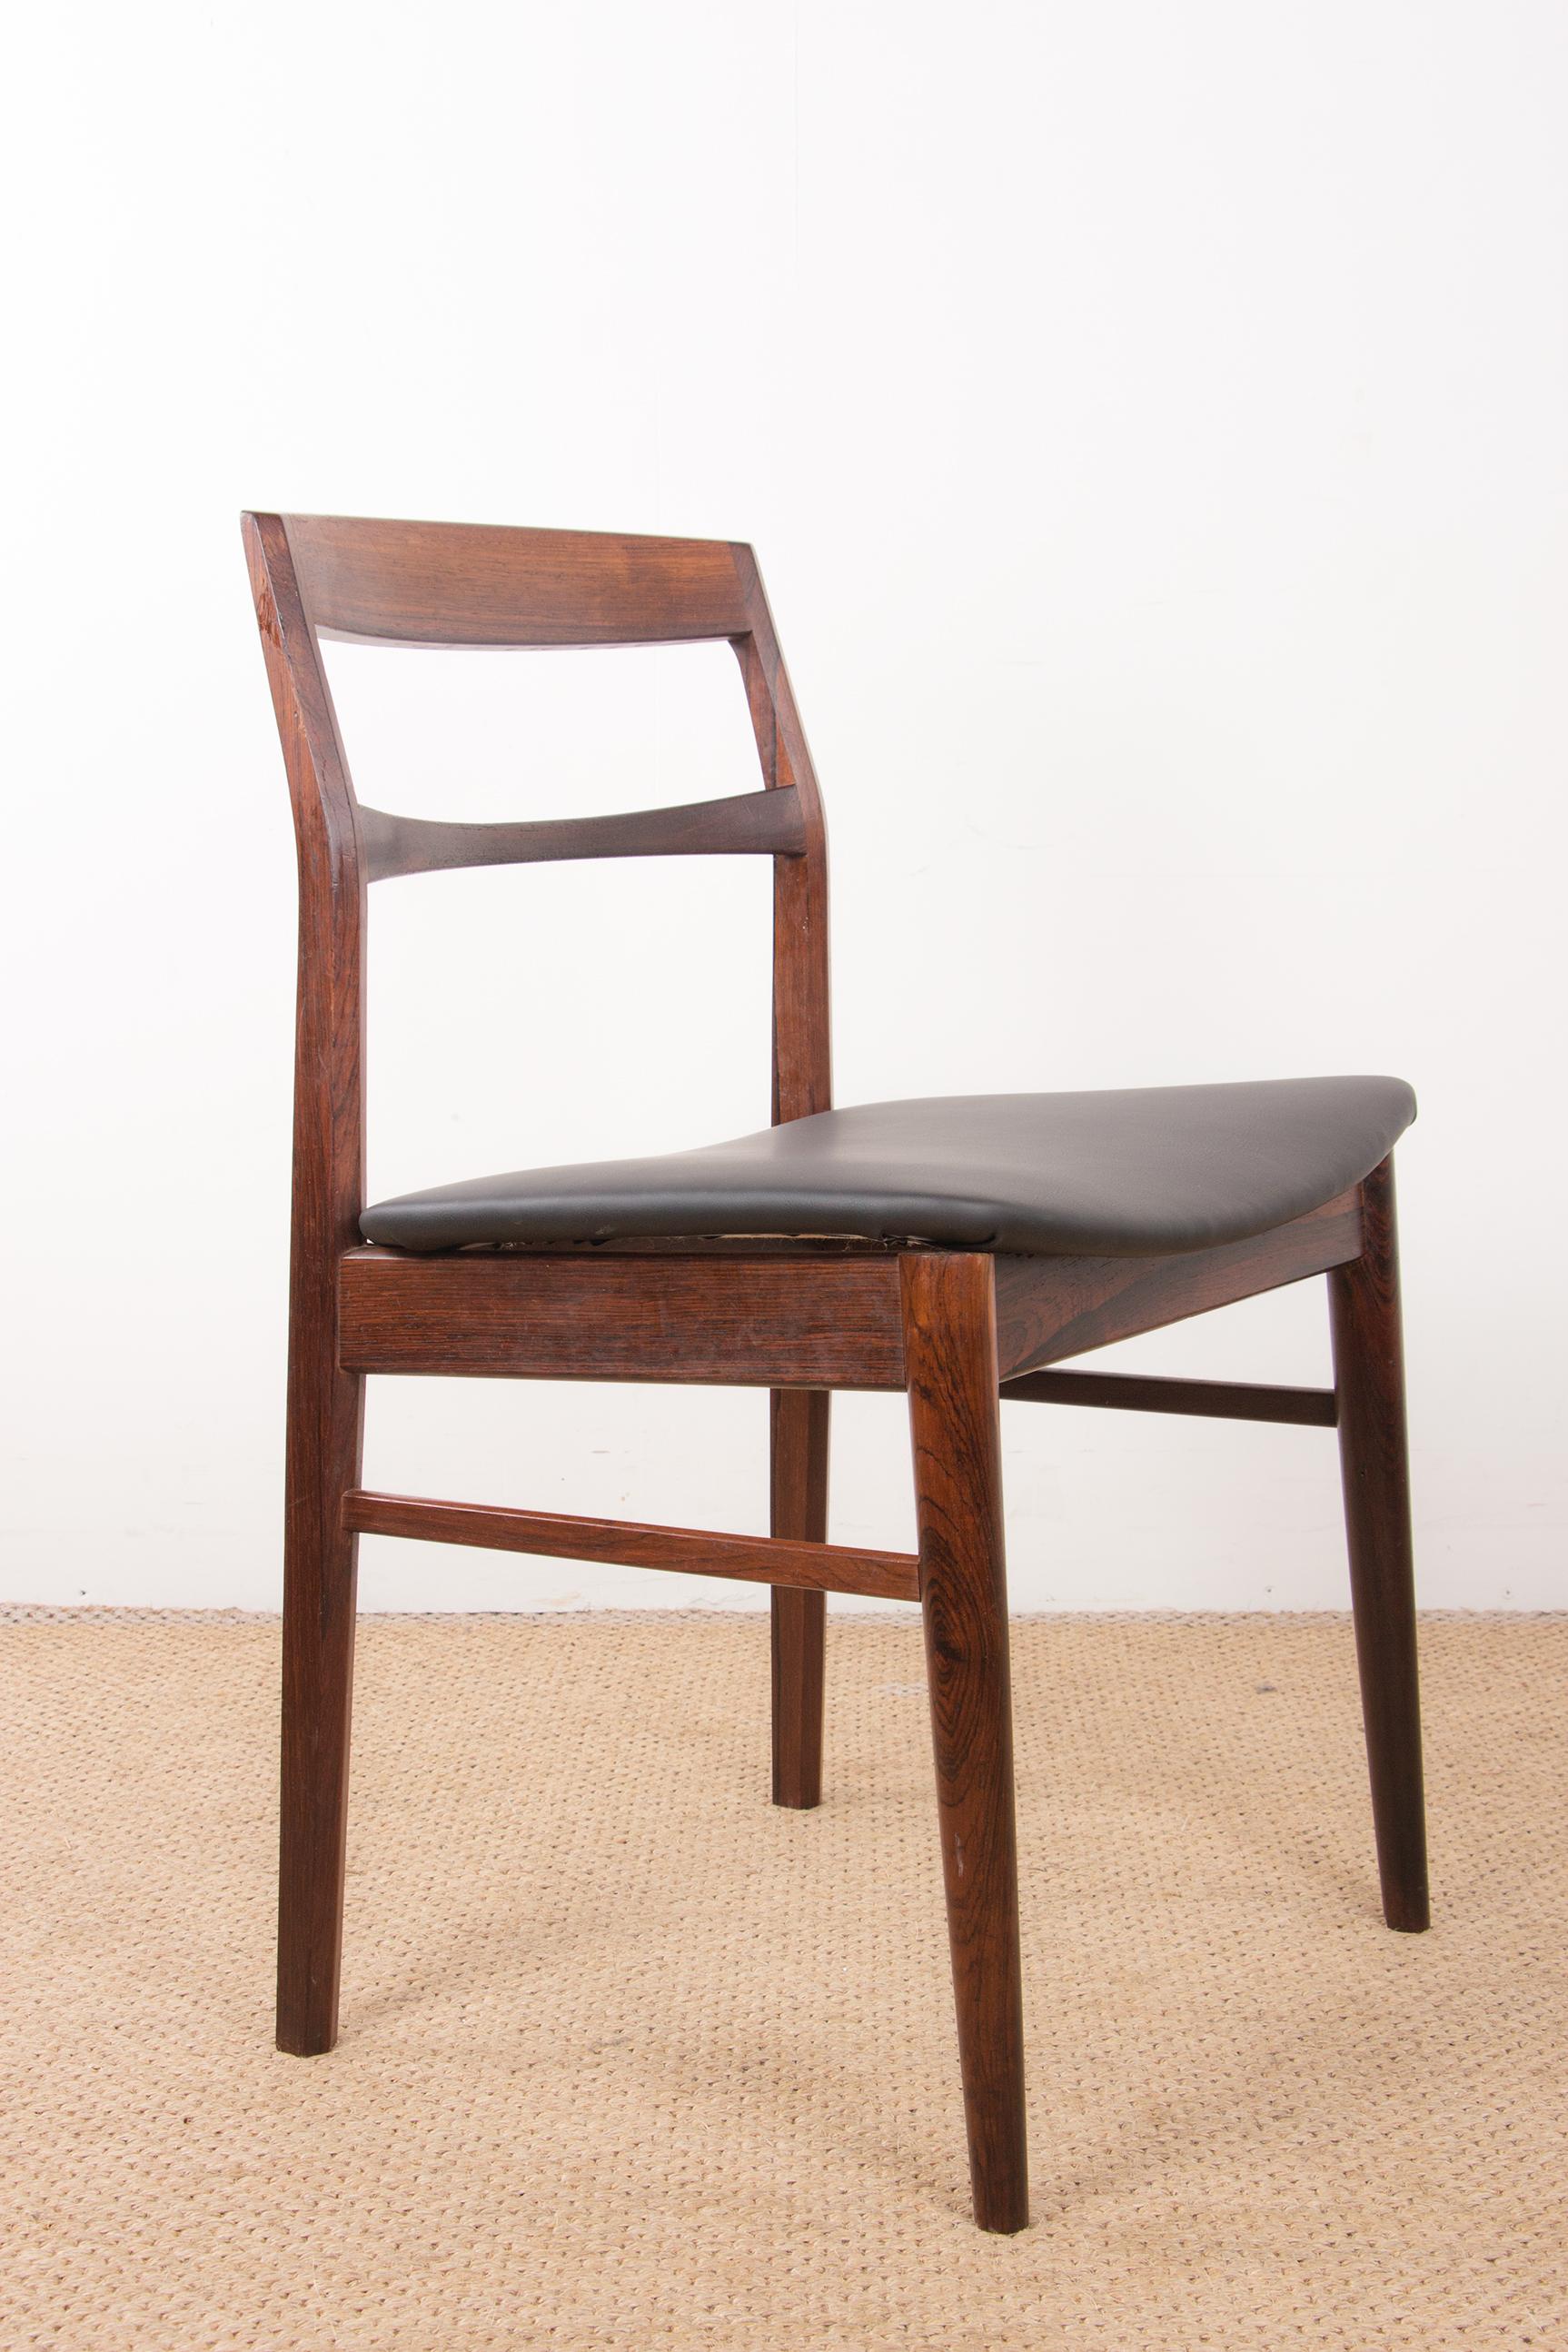 Mid-20th Century Set of 4 Danish chairs in Rosewood and Skai new by Henning Kjaernulf for Vejl For Sale